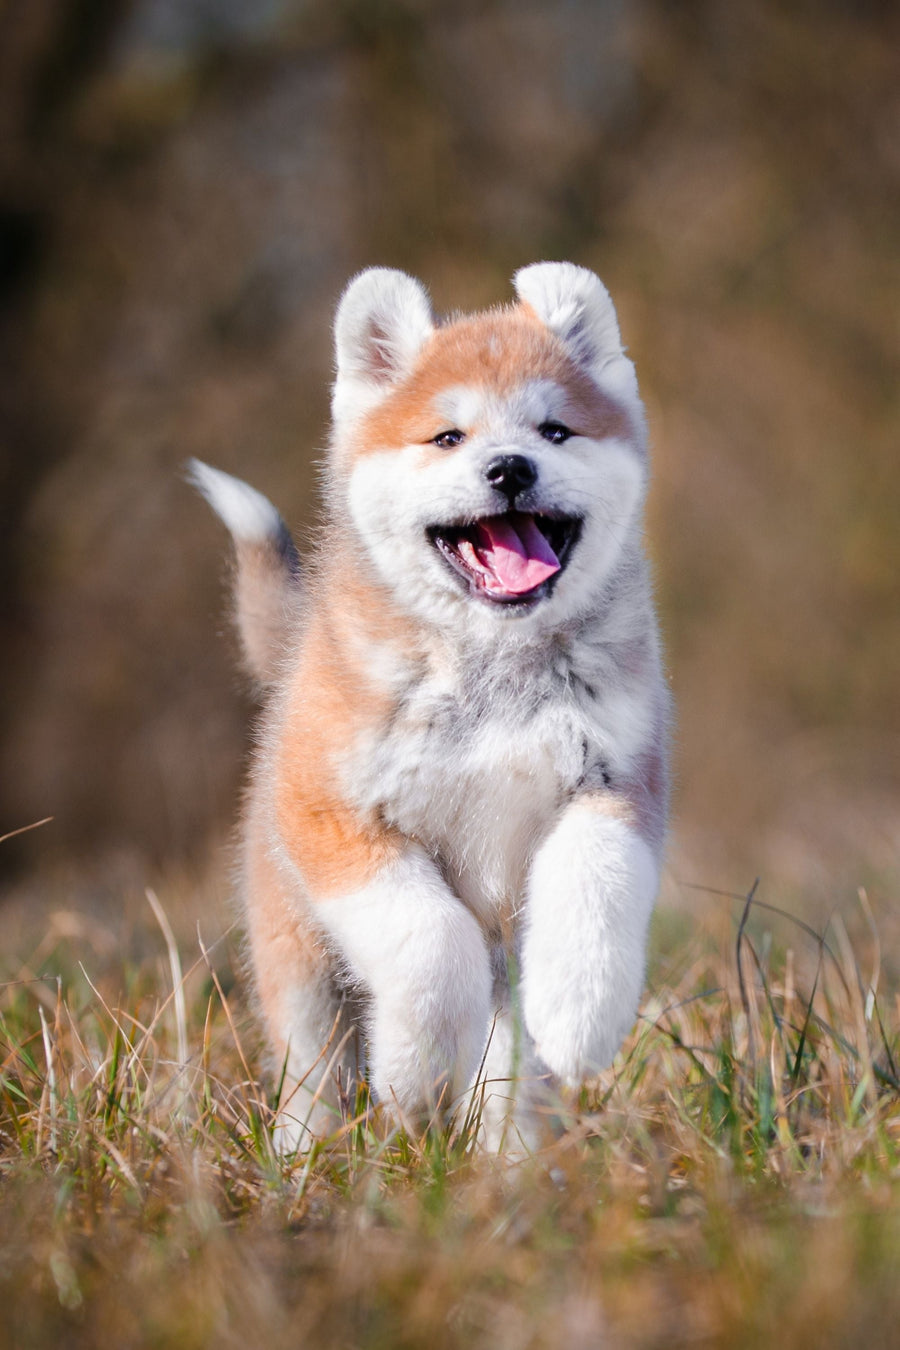 Equipment for puppies, showing a happy brown and white husky puppy running towards the photographer.